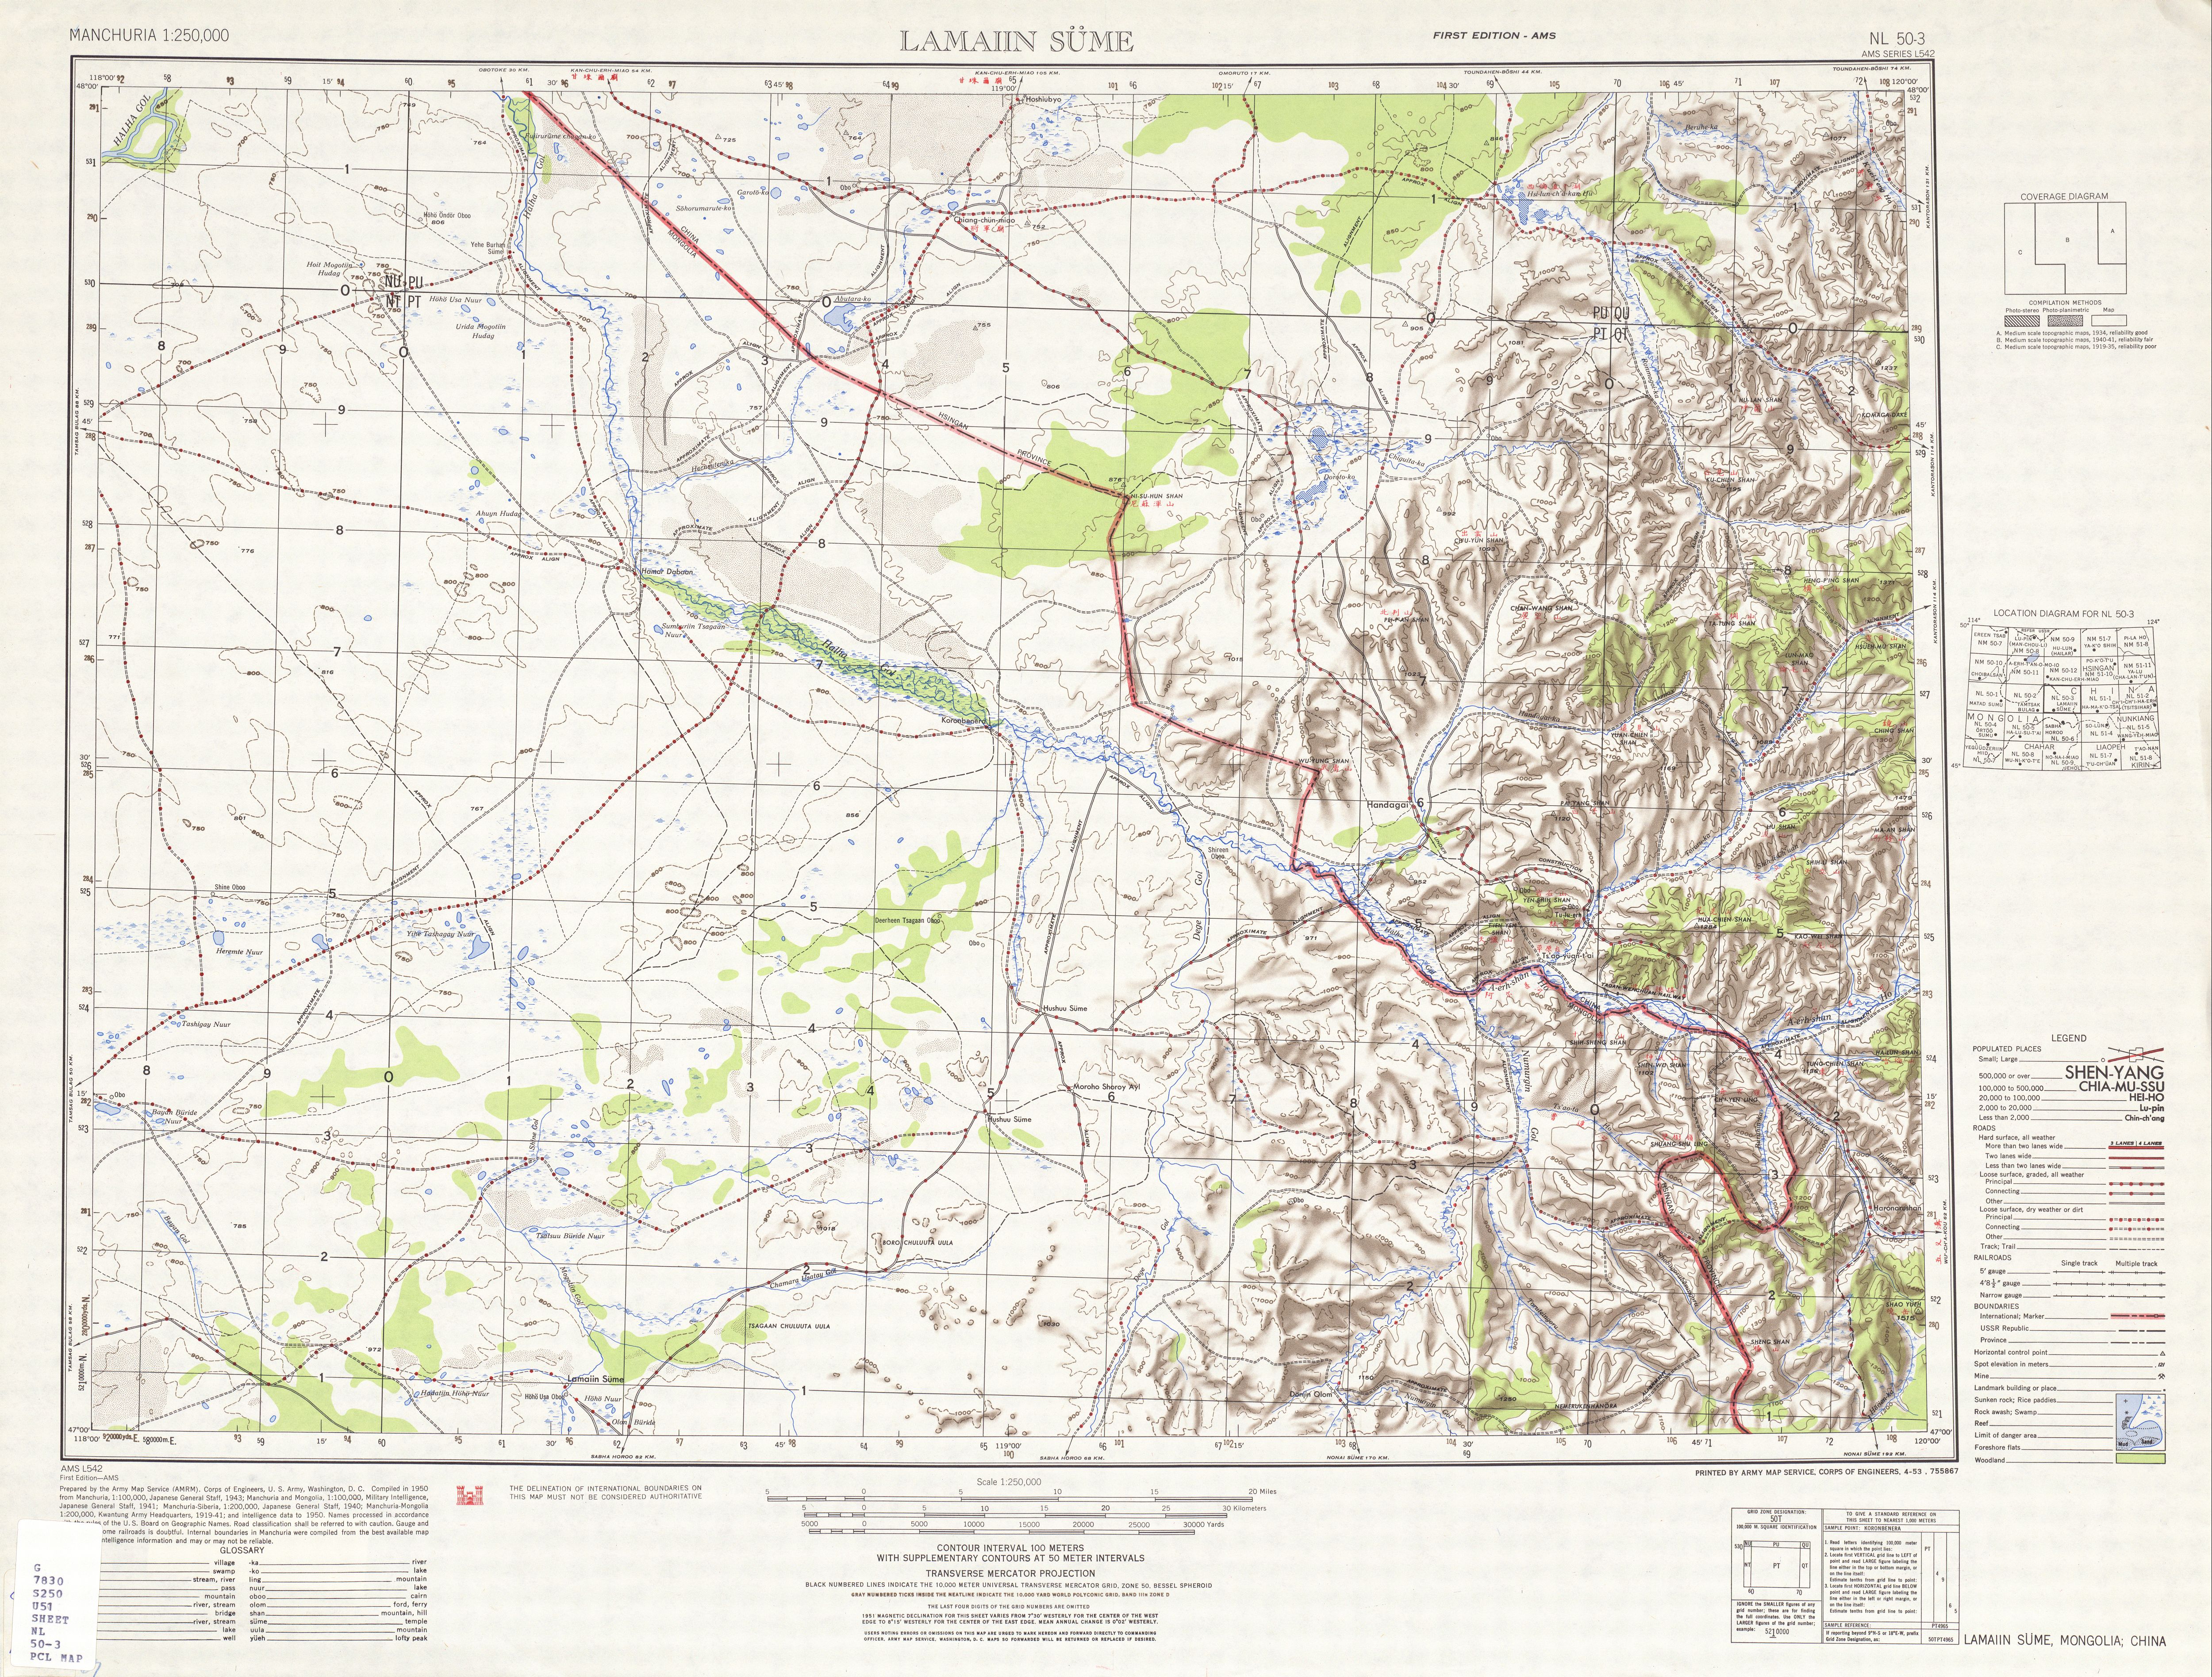 1950 US Army topographic map of Lamiin Süme region of Manchuria in China and of Mongolia